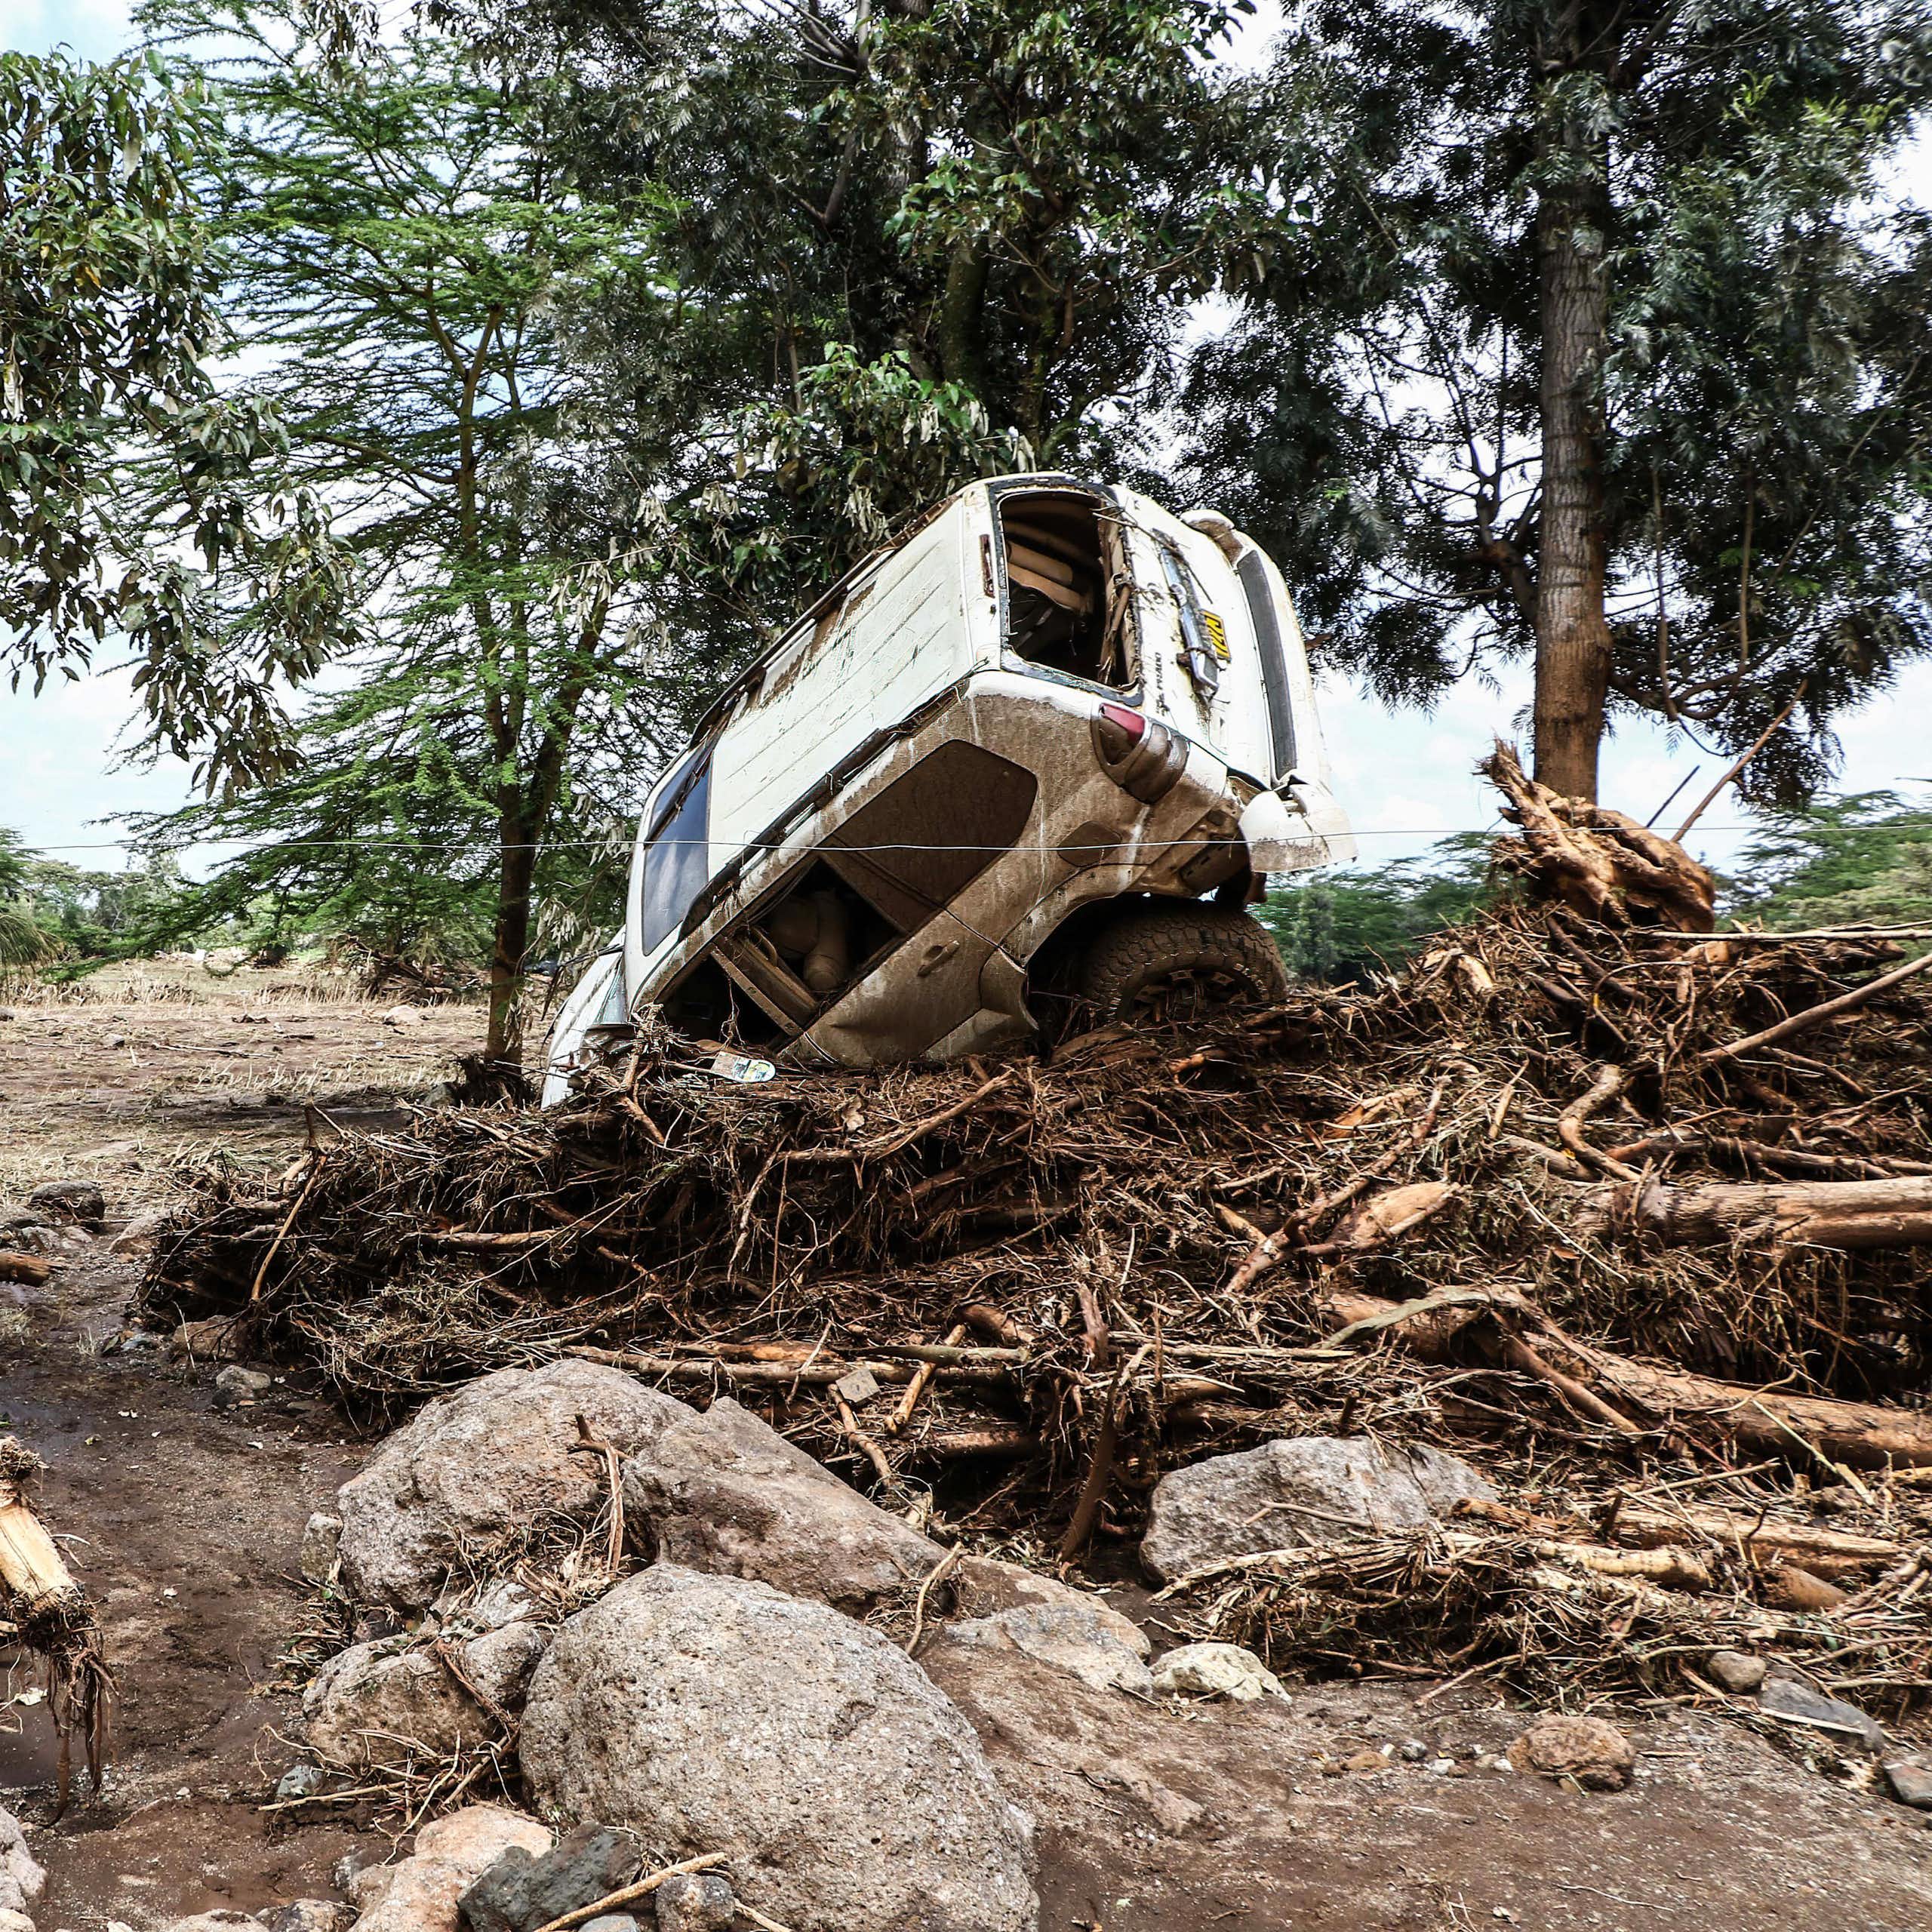 Kenya floods: as the costs add up pressure mounts on a country in economic crisis